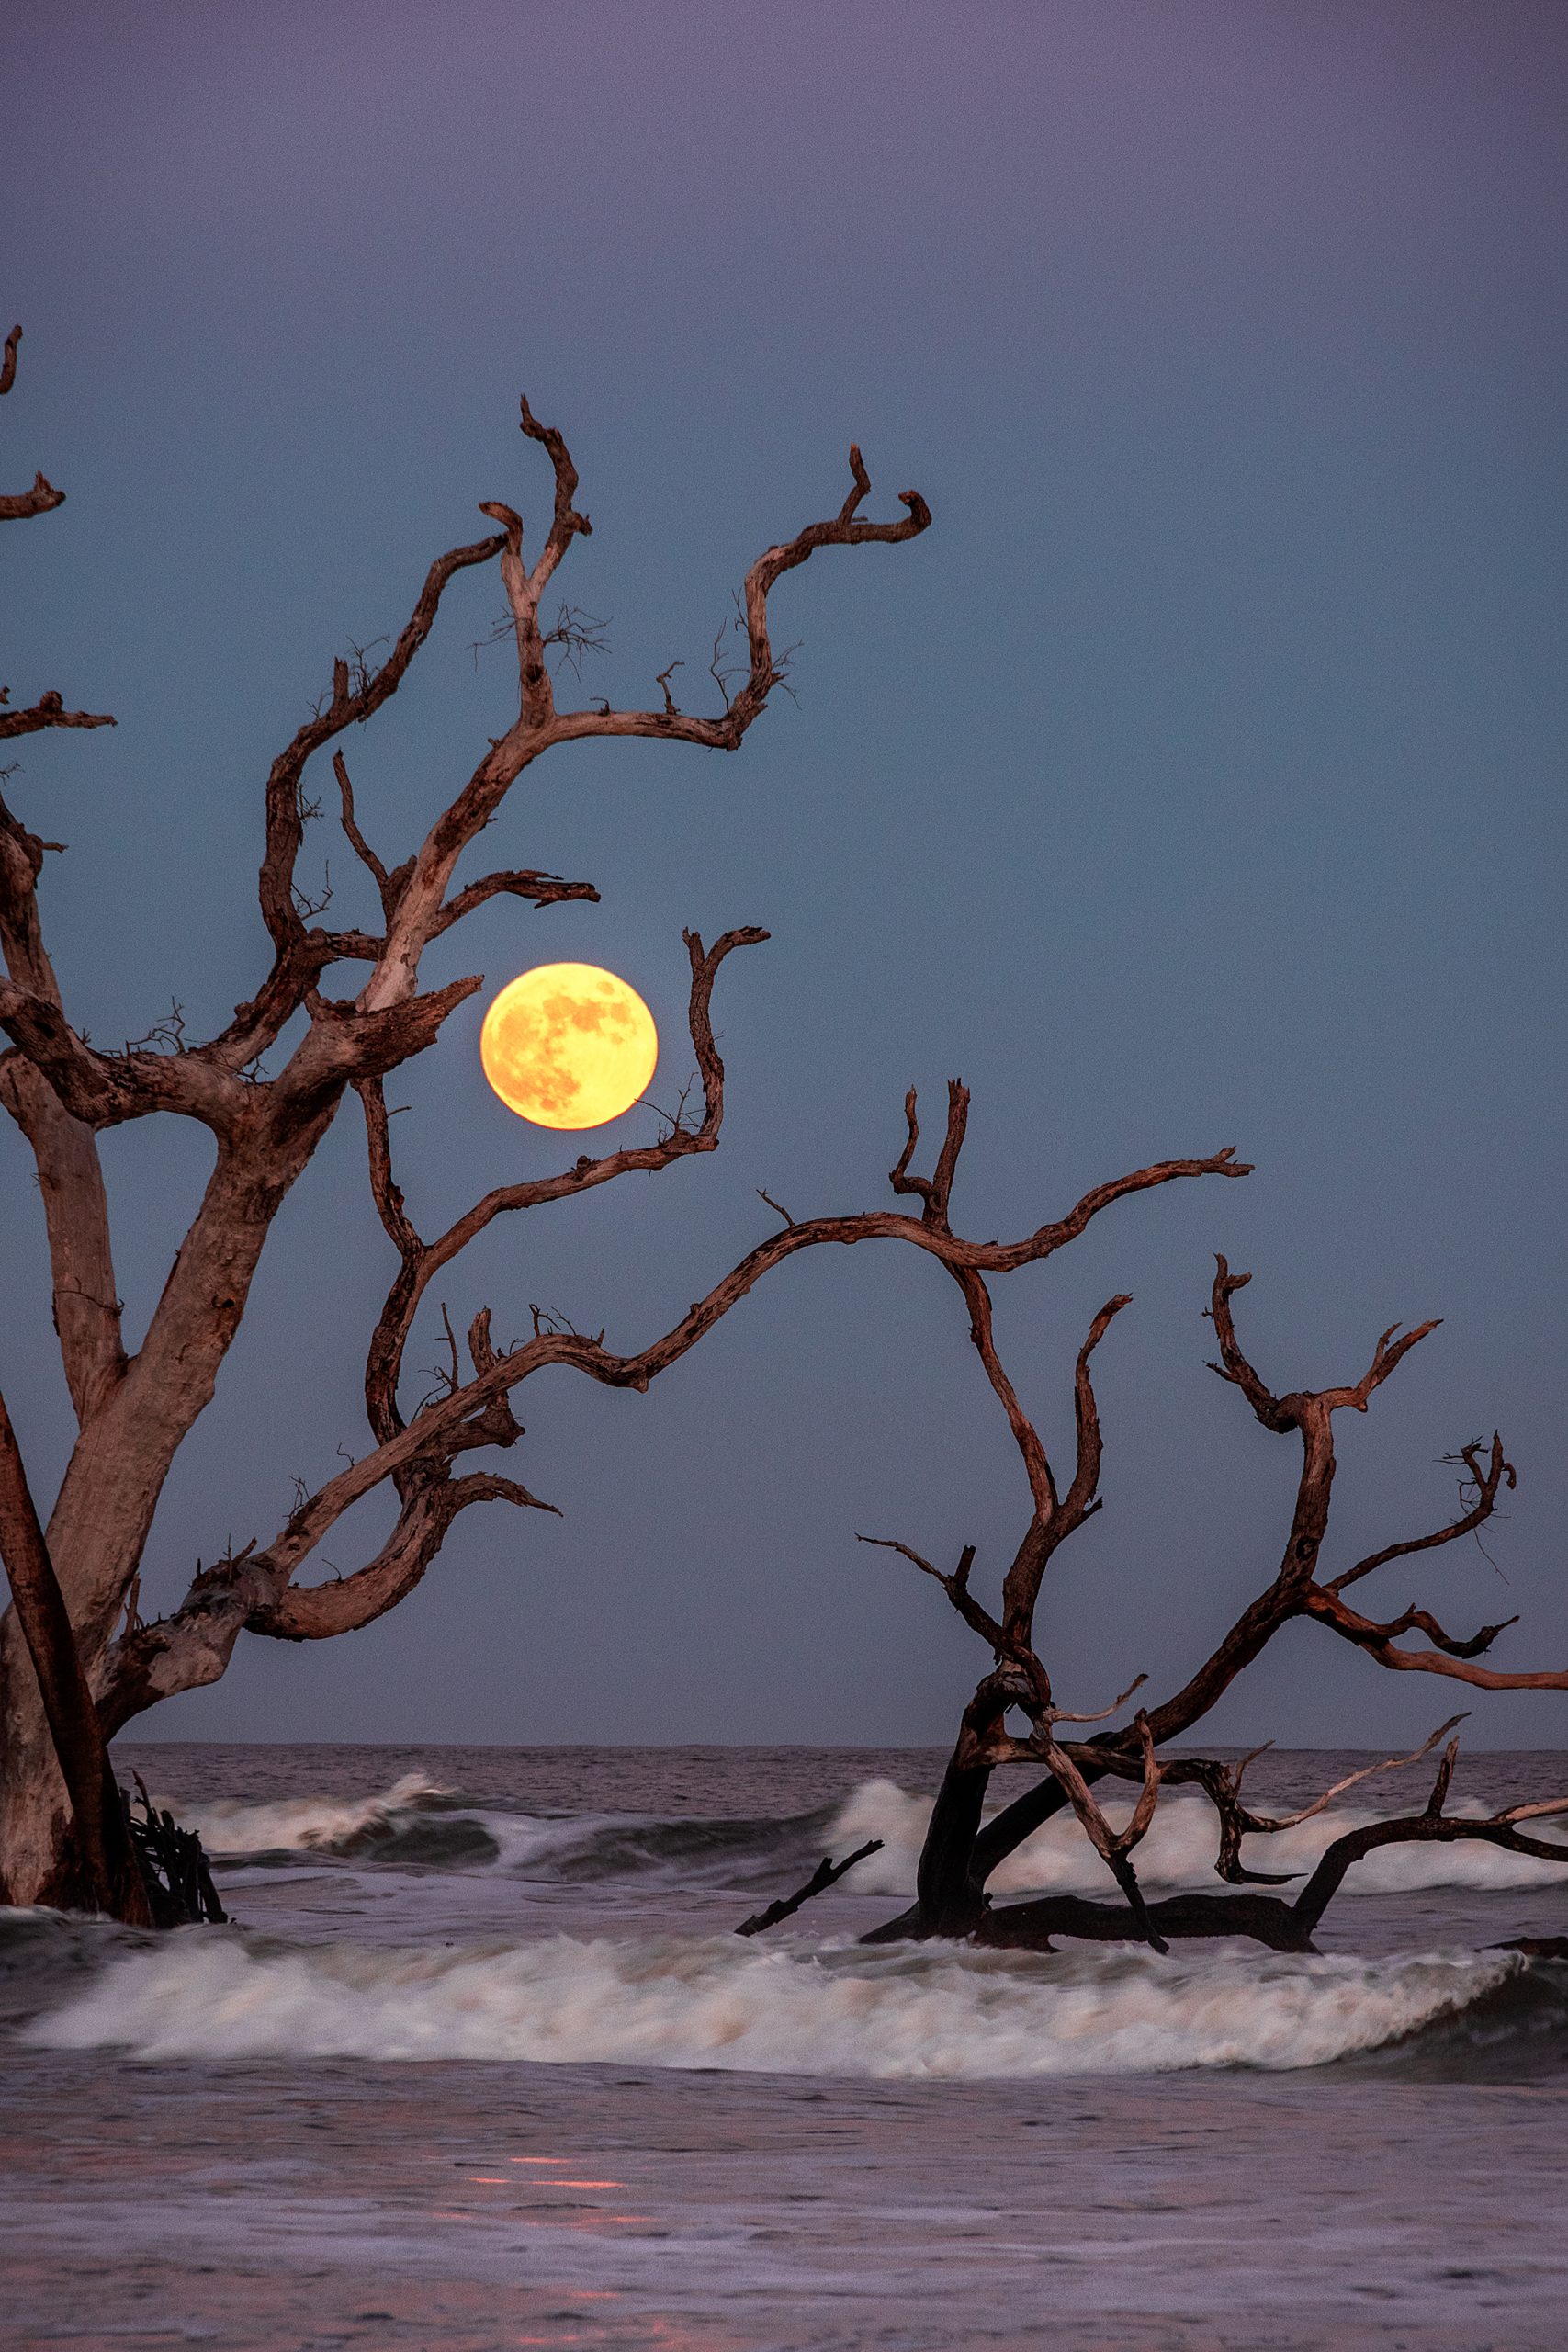 In all likelihood, these boneyard trees along the ocean’s edge were flooded by a full moon king tide years ago. Salt preserves the trees, as they pay homage to twilight’s full moon. 